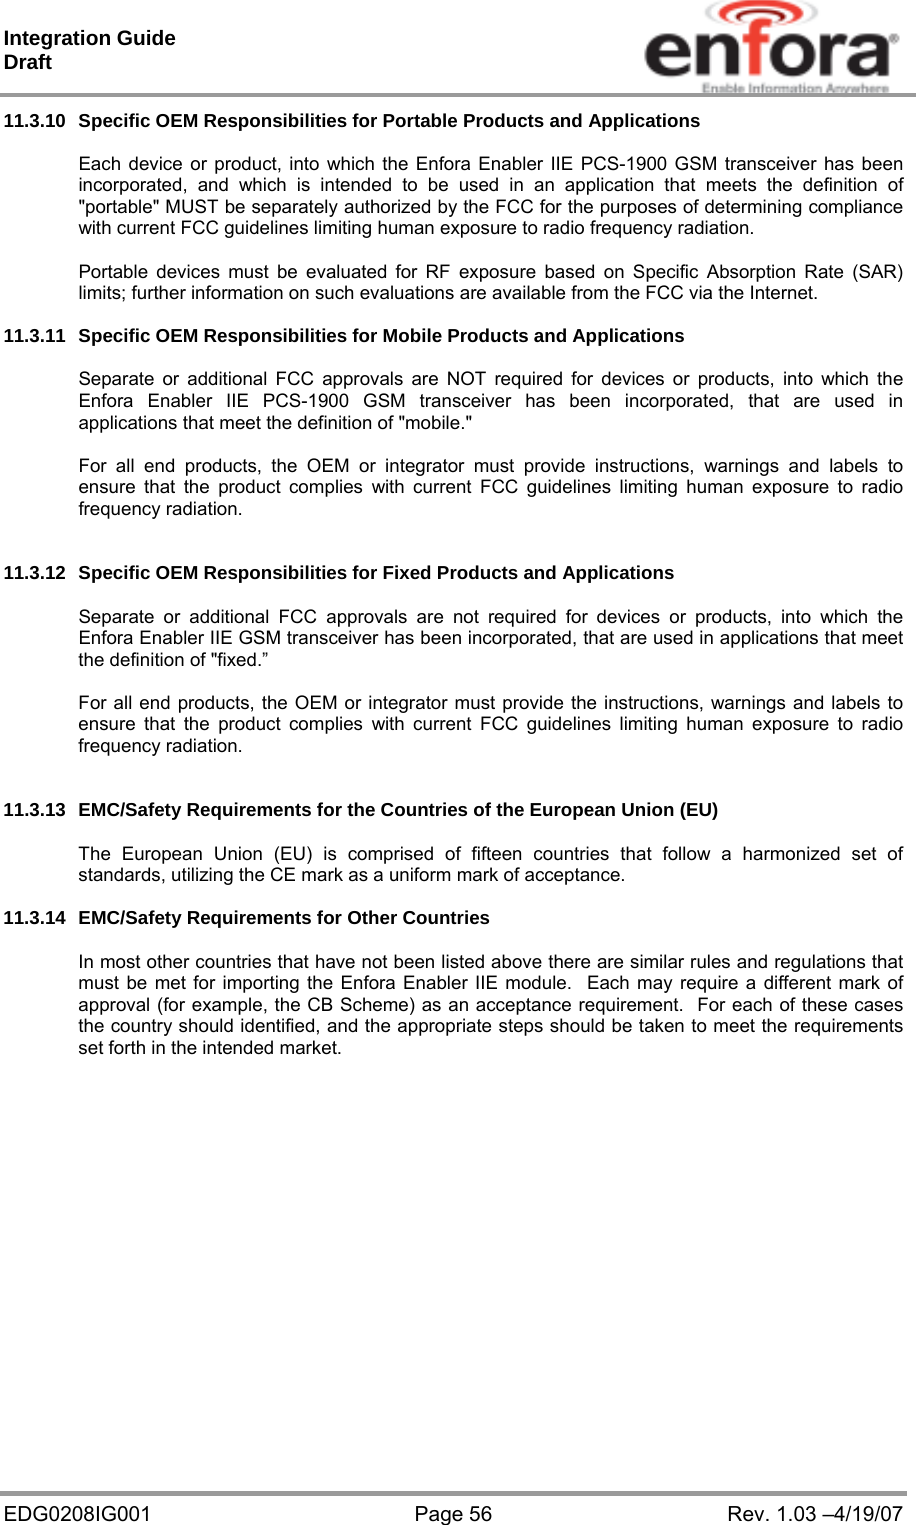 Integration Guide  Draft EDG0208IG001  Page 56  Rev. 1.03 –4/19/07 11.3.10  Specific OEM Responsibilities for Portable Products and Applications  Each device or product, into which the Enfora Enabler IIE PCS-1900 GSM transceiver has been incorporated, and which is intended to be used in an application that meets the definition of &quot;portable&quot; MUST be separately authorized by the FCC for the purposes of determining compliance with current FCC guidelines limiting human exposure to radio frequency radiation.  Portable devices must be evaluated for RF exposure based on Specific Absorption Rate (SAR) limits; further information on such evaluations are available from the FCC via the Internet.  11.3.11  Specific OEM Responsibilities for Mobile Products and Applications  Separate or additional FCC approvals are NOT required for devices or products, into which the Enfora Enabler IIE PCS-1900 GSM transceiver has been incorporated, that are used in applications that meet the definition of &quot;mobile.&quot;  For all end products, the OEM or integrator must provide instructions, warnings and labels to ensure that the product complies with current FCC guidelines limiting human exposure to radio frequency radiation.   11.3.12  Specific OEM Responsibilities for Fixed Products and Applications  Separate or additional FCC approvals are not required for devices or products, into which the Enfora Enabler IIE GSM transceiver has been incorporated, that are used in applications that meet the definition of &quot;fixed.”  For all end products, the OEM or integrator must provide the instructions, warnings and labels to ensure that the product complies with current FCC guidelines limiting human exposure to radio frequency radiation.   11.3.13  EMC/Safety Requirements for the Countries of the European Union (EU)  The European Union (EU) is comprised of fifteen countries that follow a harmonized set of standards, utilizing the CE mark as a uniform mark of acceptance.     11.3.14  EMC/Safety Requirements for Other Countries  In most other countries that have not been listed above there are similar rules and regulations that must be met for importing the Enfora Enabler IIE module.  Each may require a different mark of approval (for example, the CB Scheme) as an acceptance requirement.  For each of these cases the country should identified, and the appropriate steps should be taken to meet the requirements set forth in the intended market.    